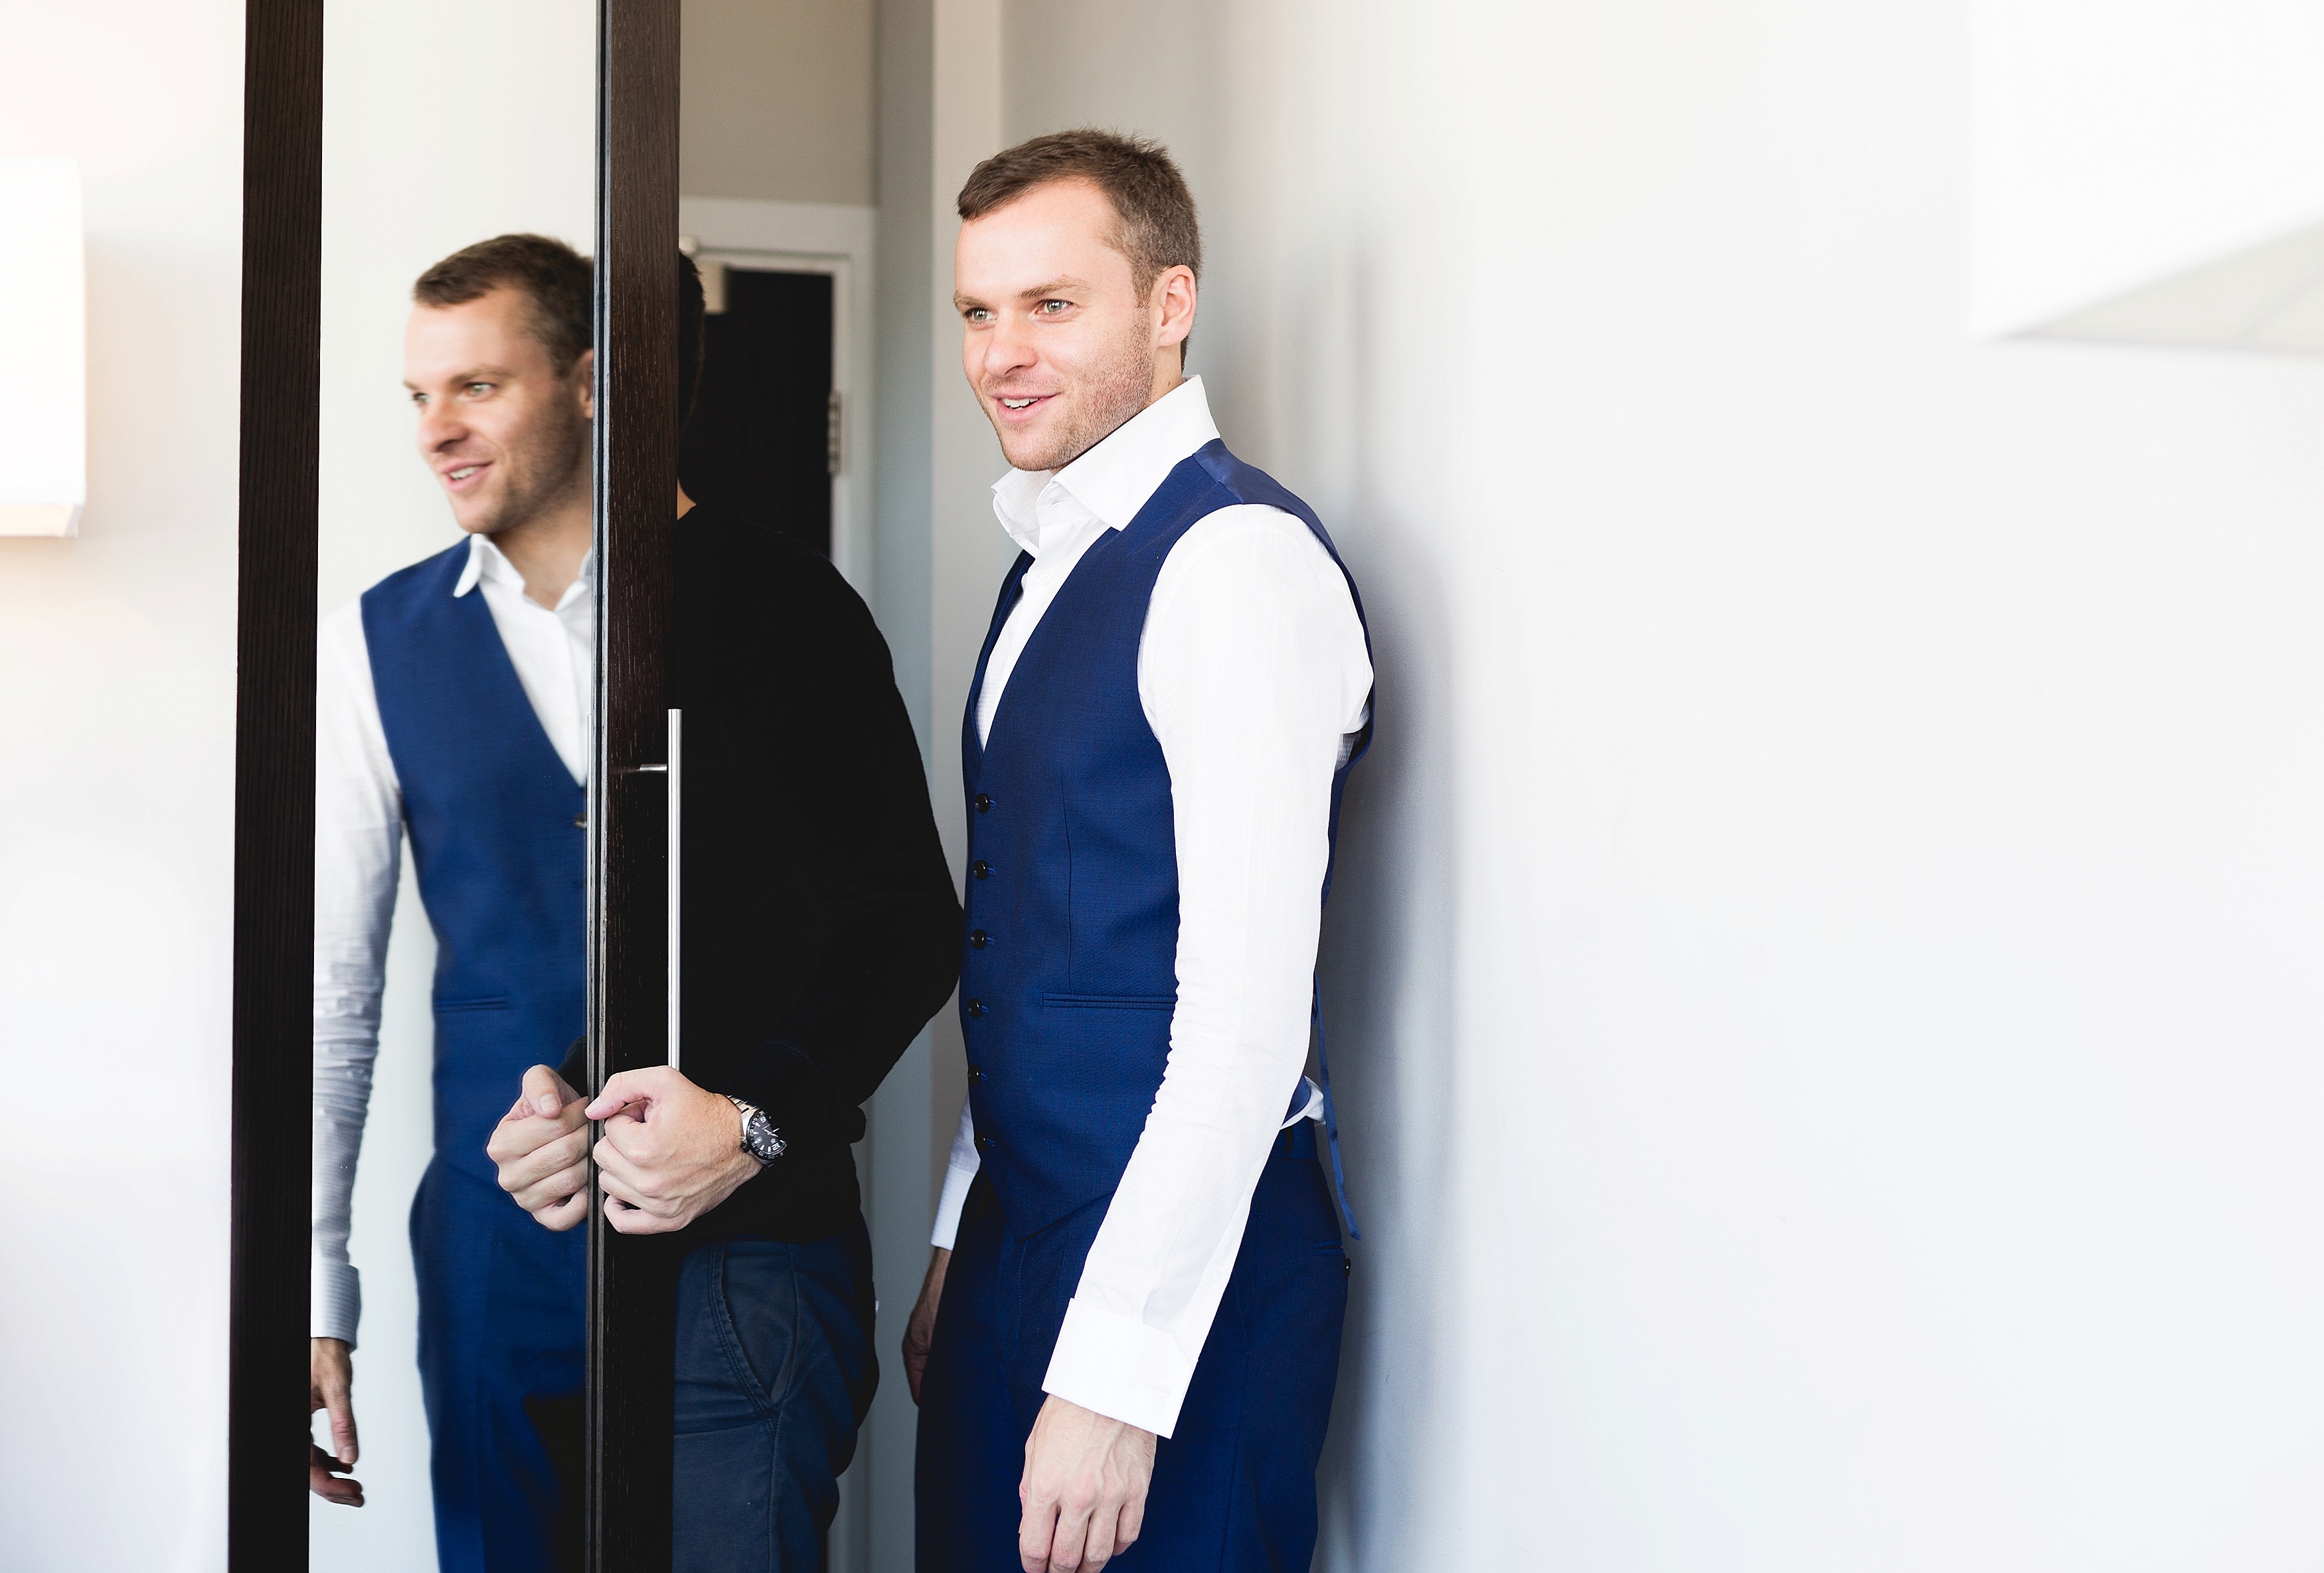 Groom Prep photos in london wedding photography by beatrici photography